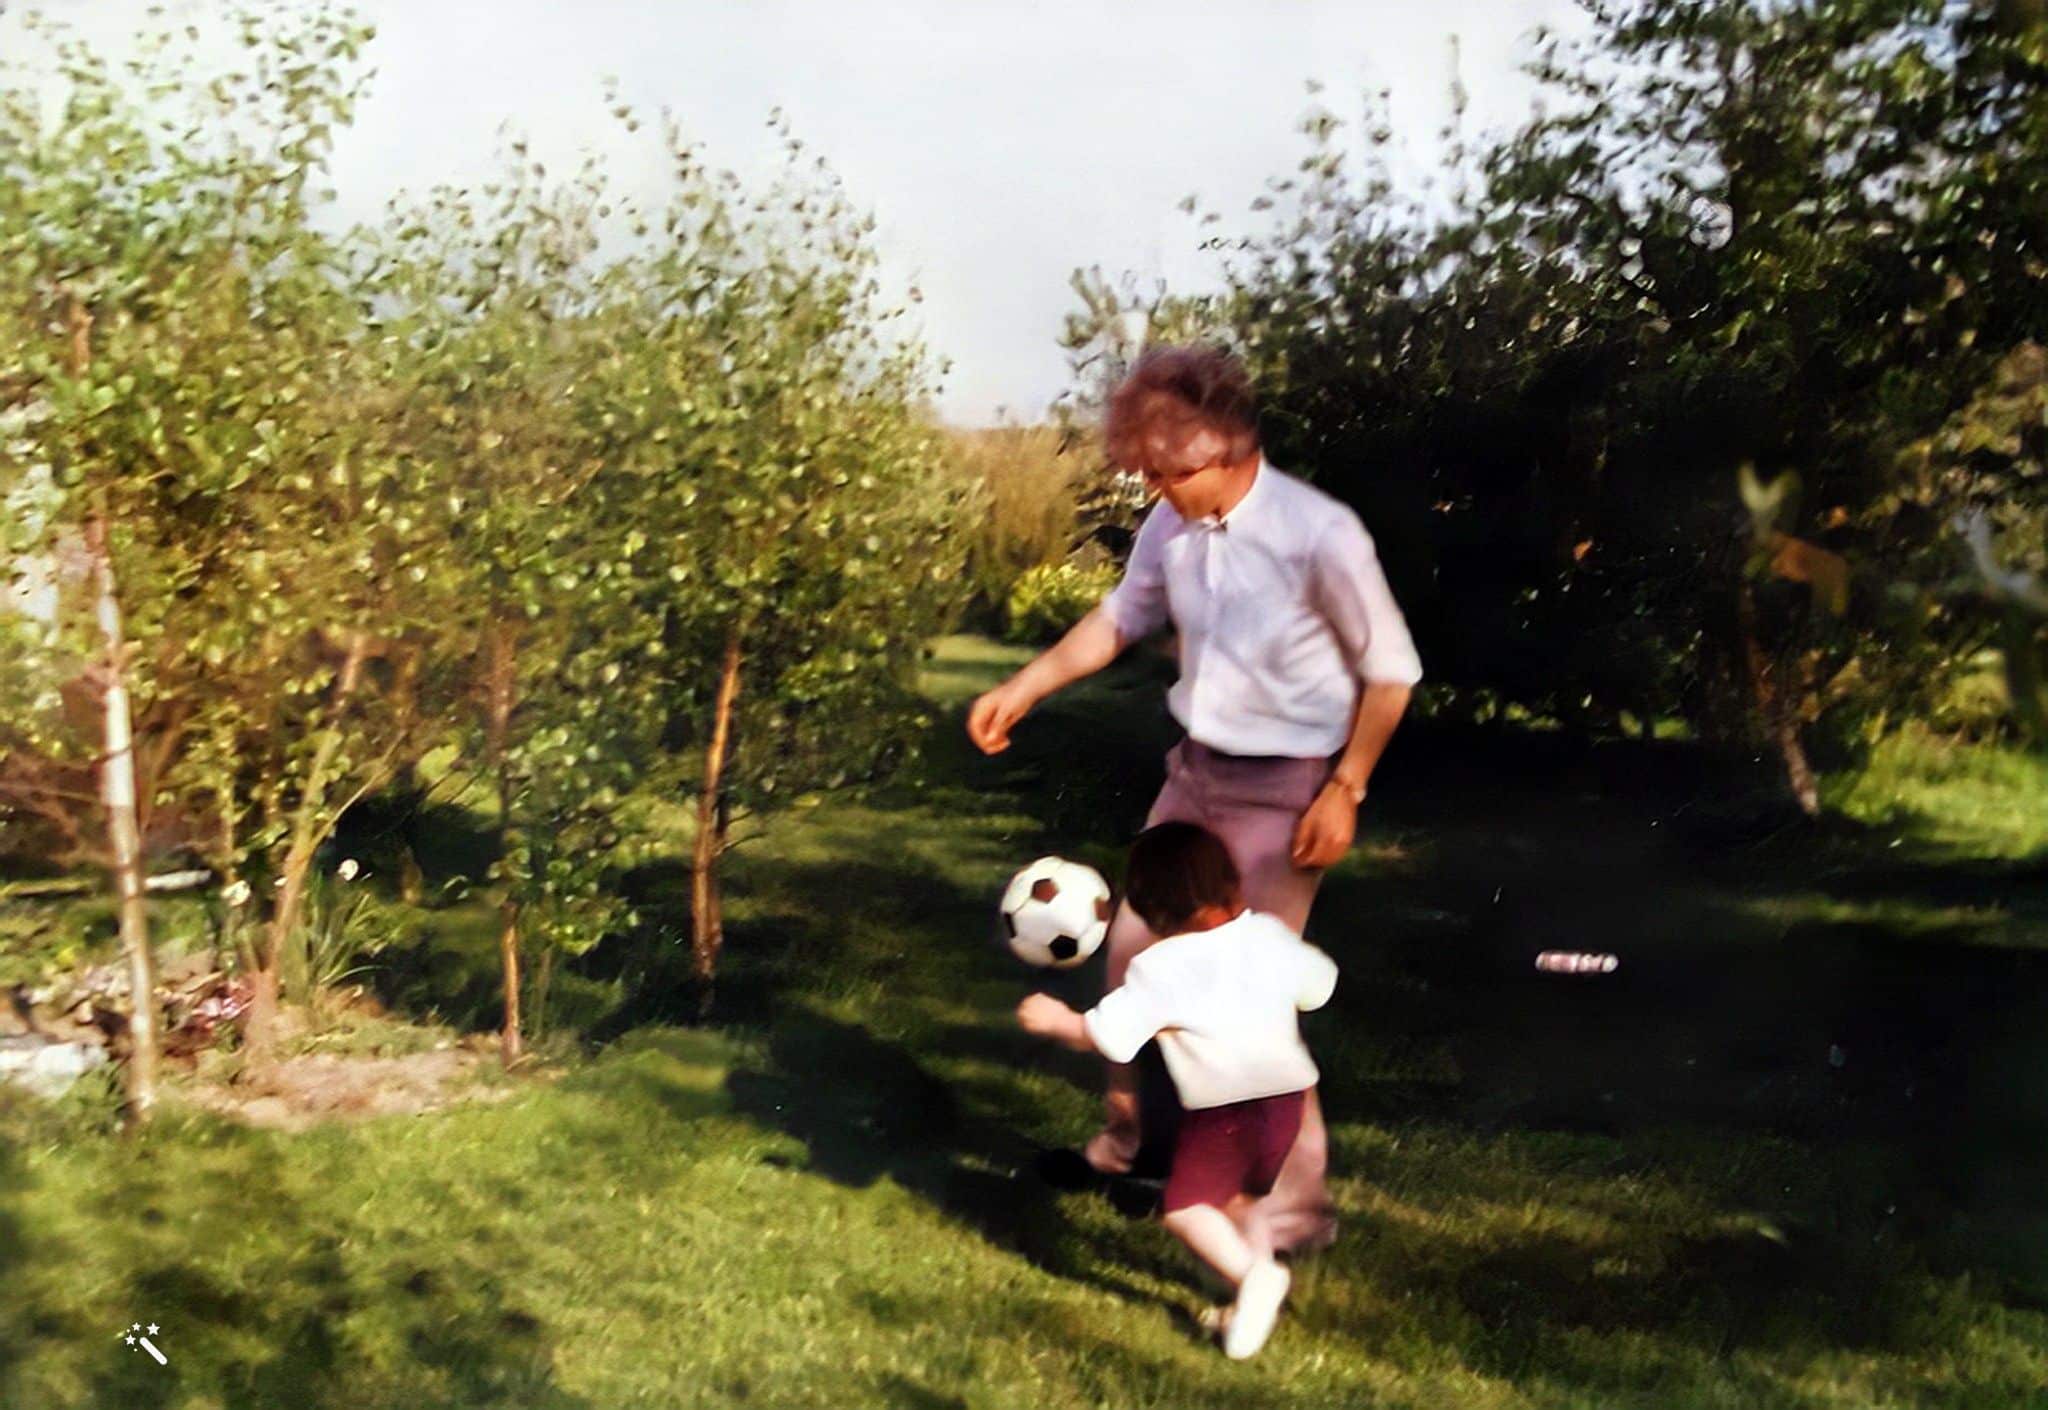 Ramón Sr. playing soccer. Photo enhanced and color-restored by MyHeritage